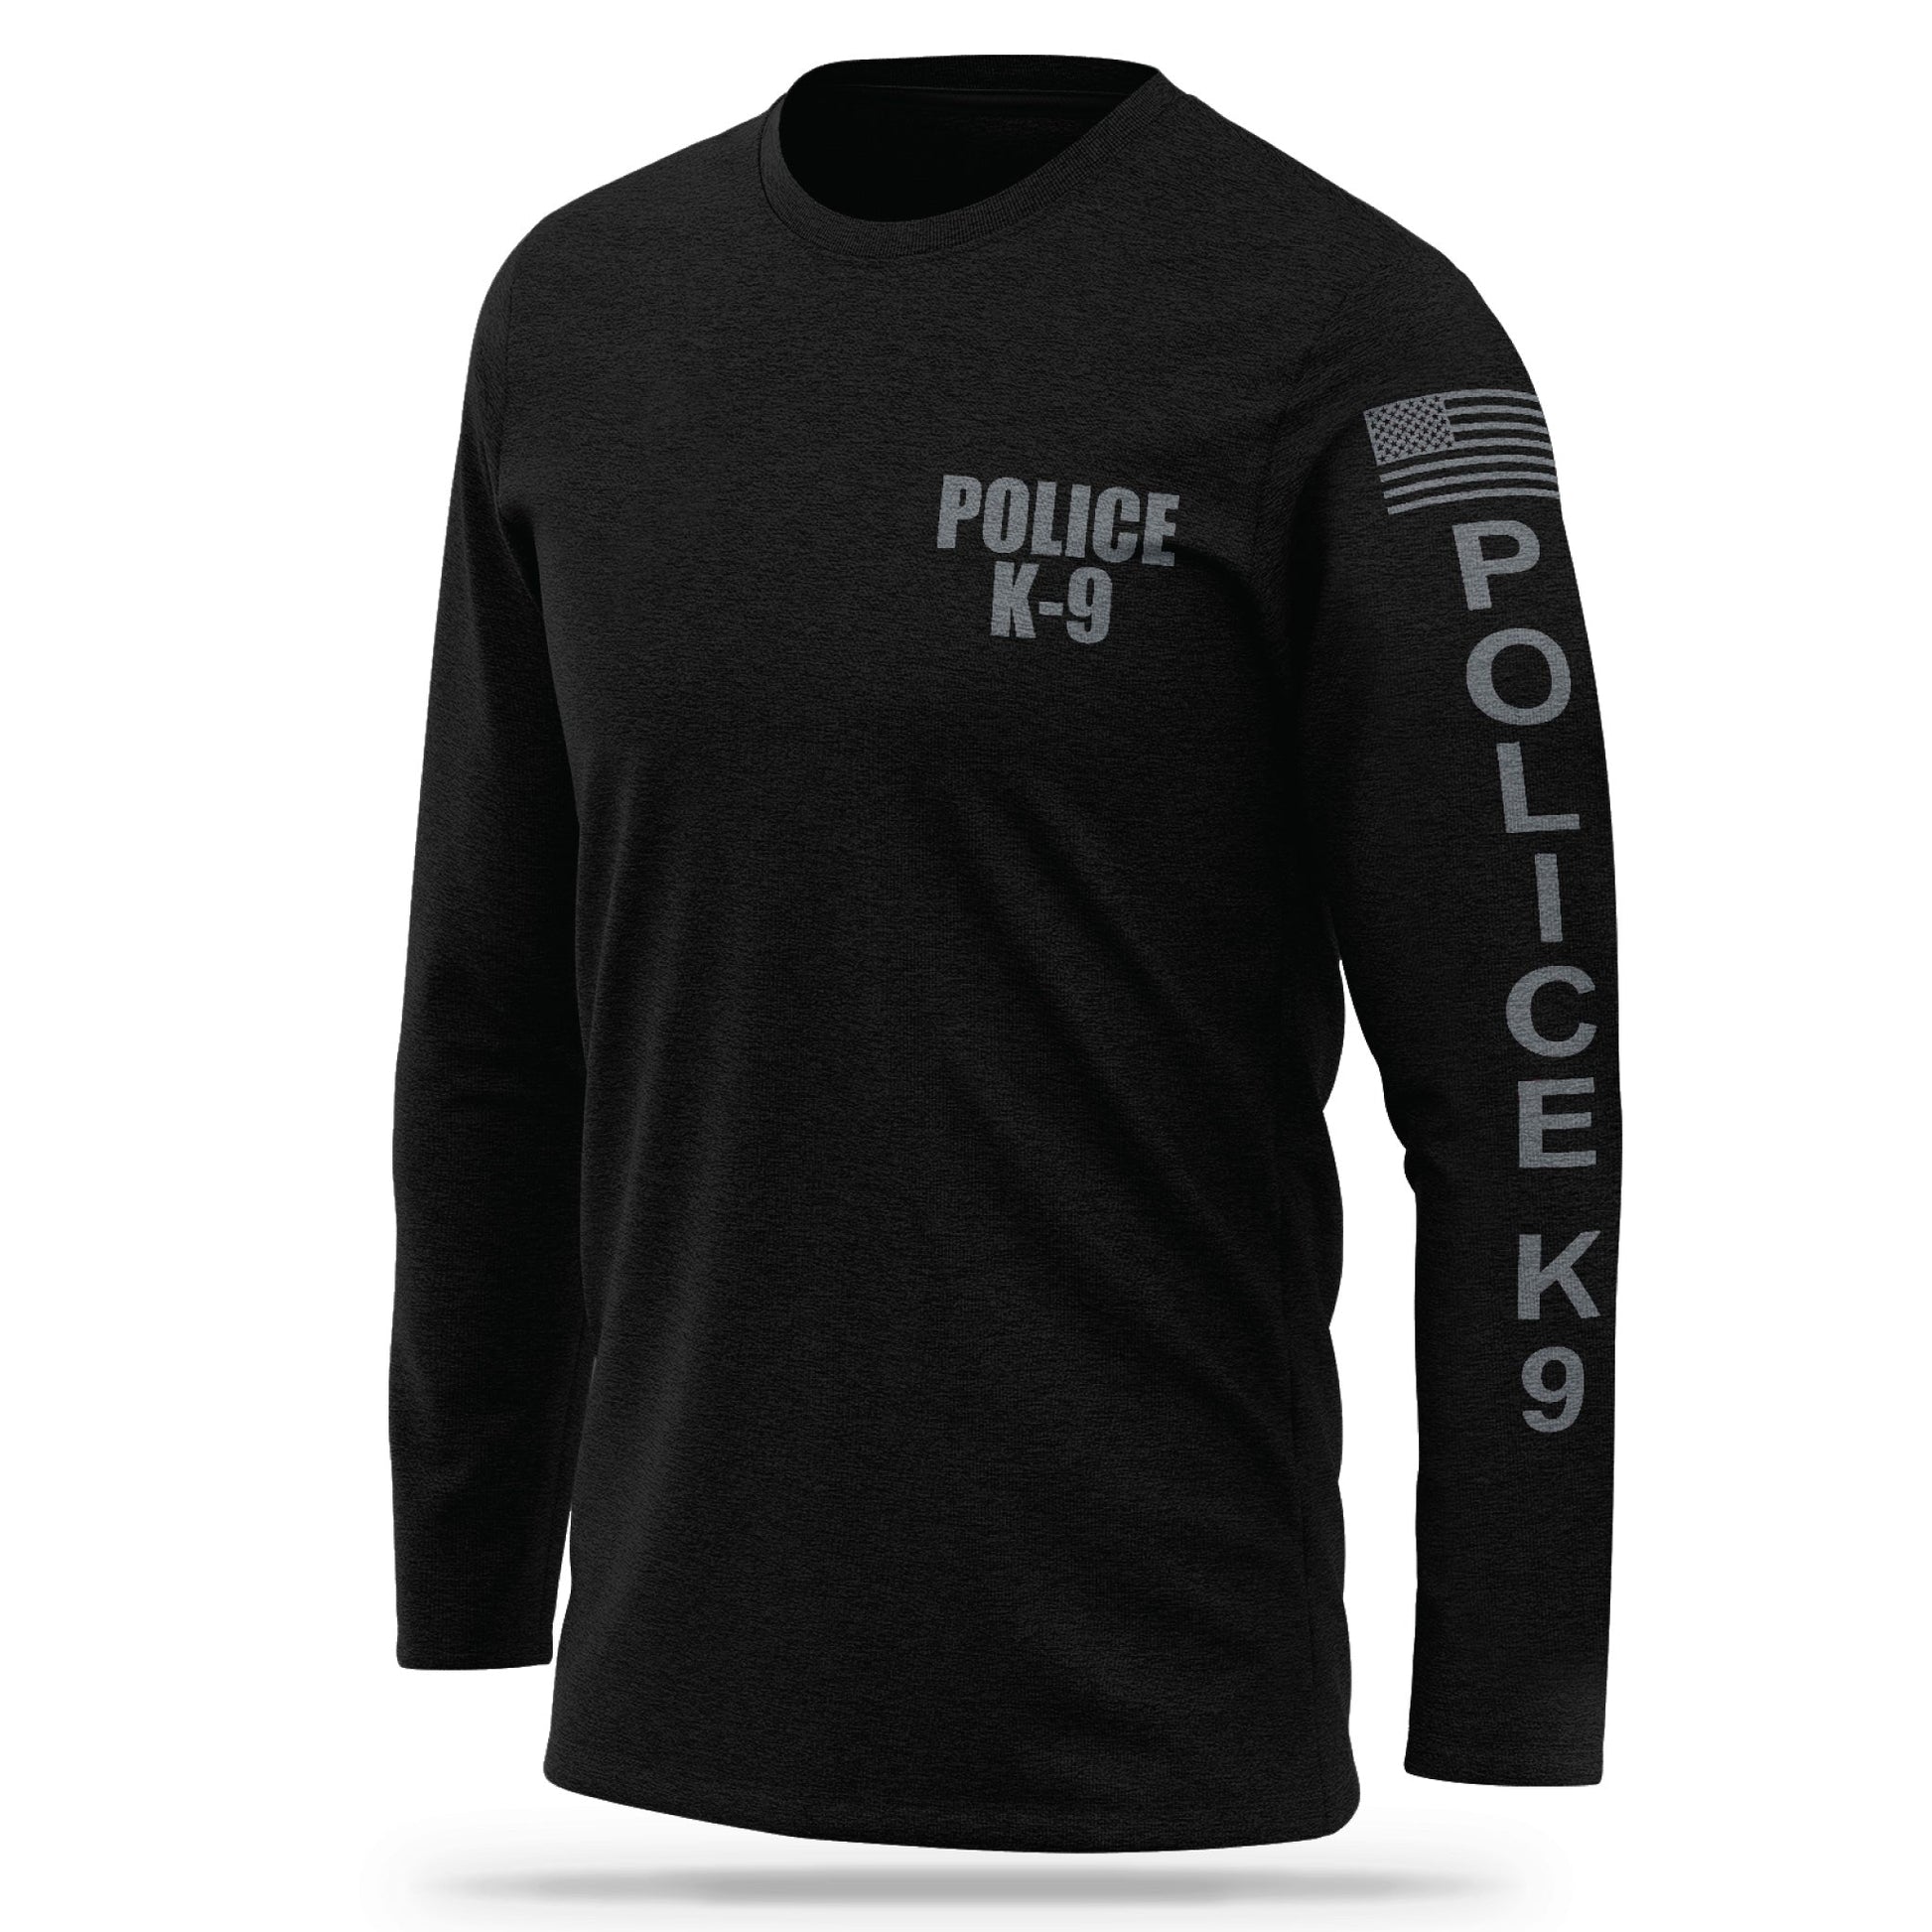 [POLICE K9] Cotton Blend Long Sleeve [BLK/GRY]-13 Fifty Apparel